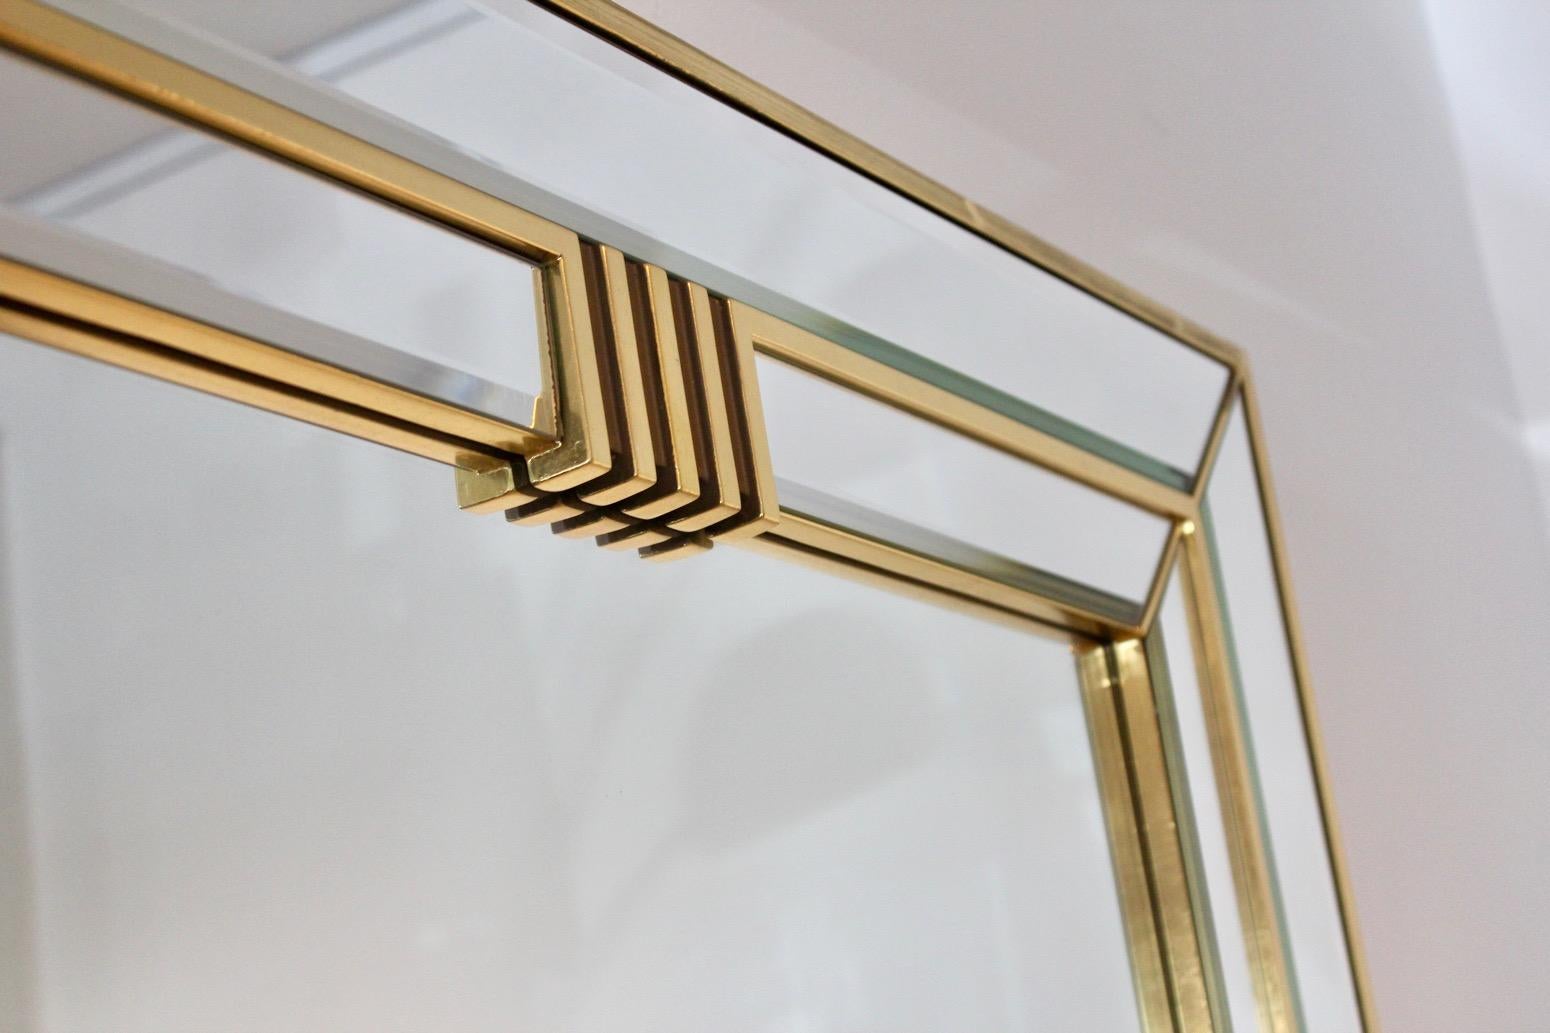 Beautiful large brass framed mirror with sophisticated Graphical design. Made in Belgium by Deknudt in the 1970s. The frame has some wear due to normal use and age. The mirror has a beautiful patina. Very elegant with beautiful and unique inset